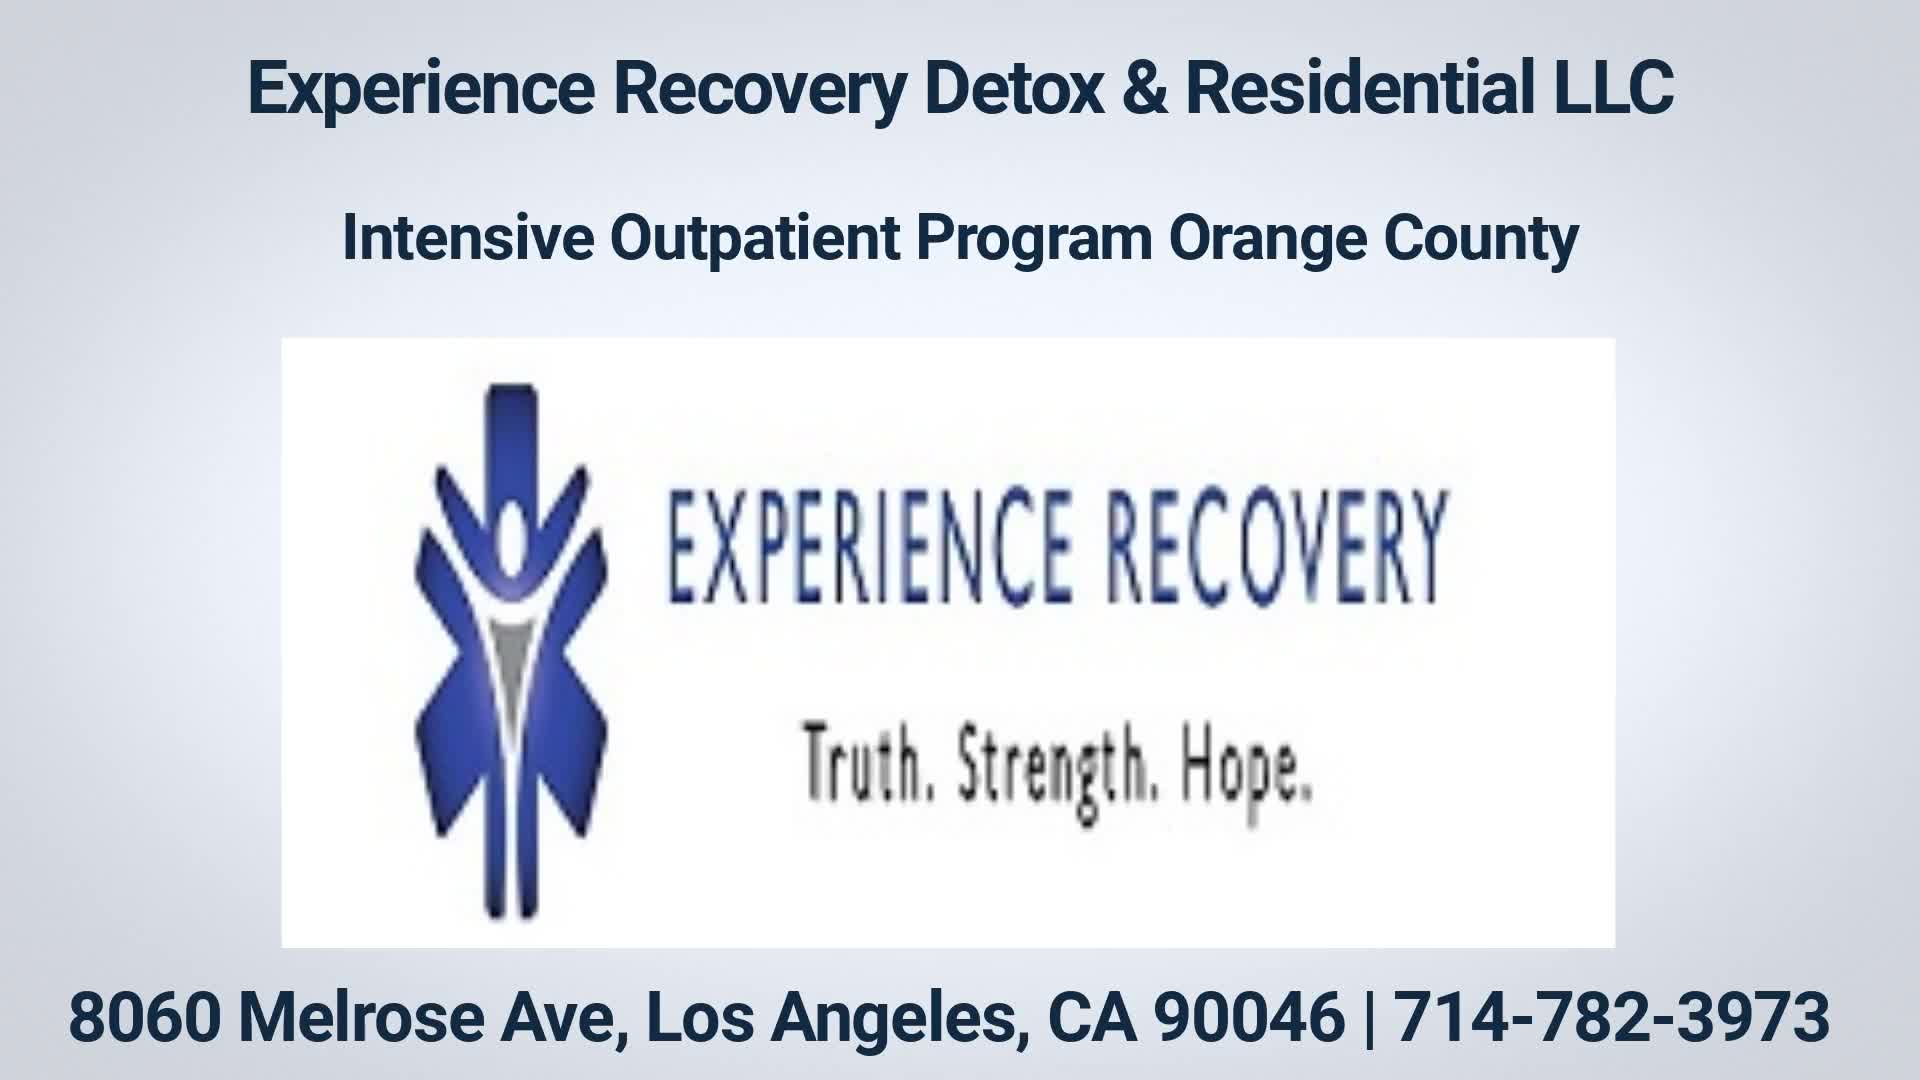 Experience Recovery Detox & Residential LLC - Intensive Outpatient Program in Orange County